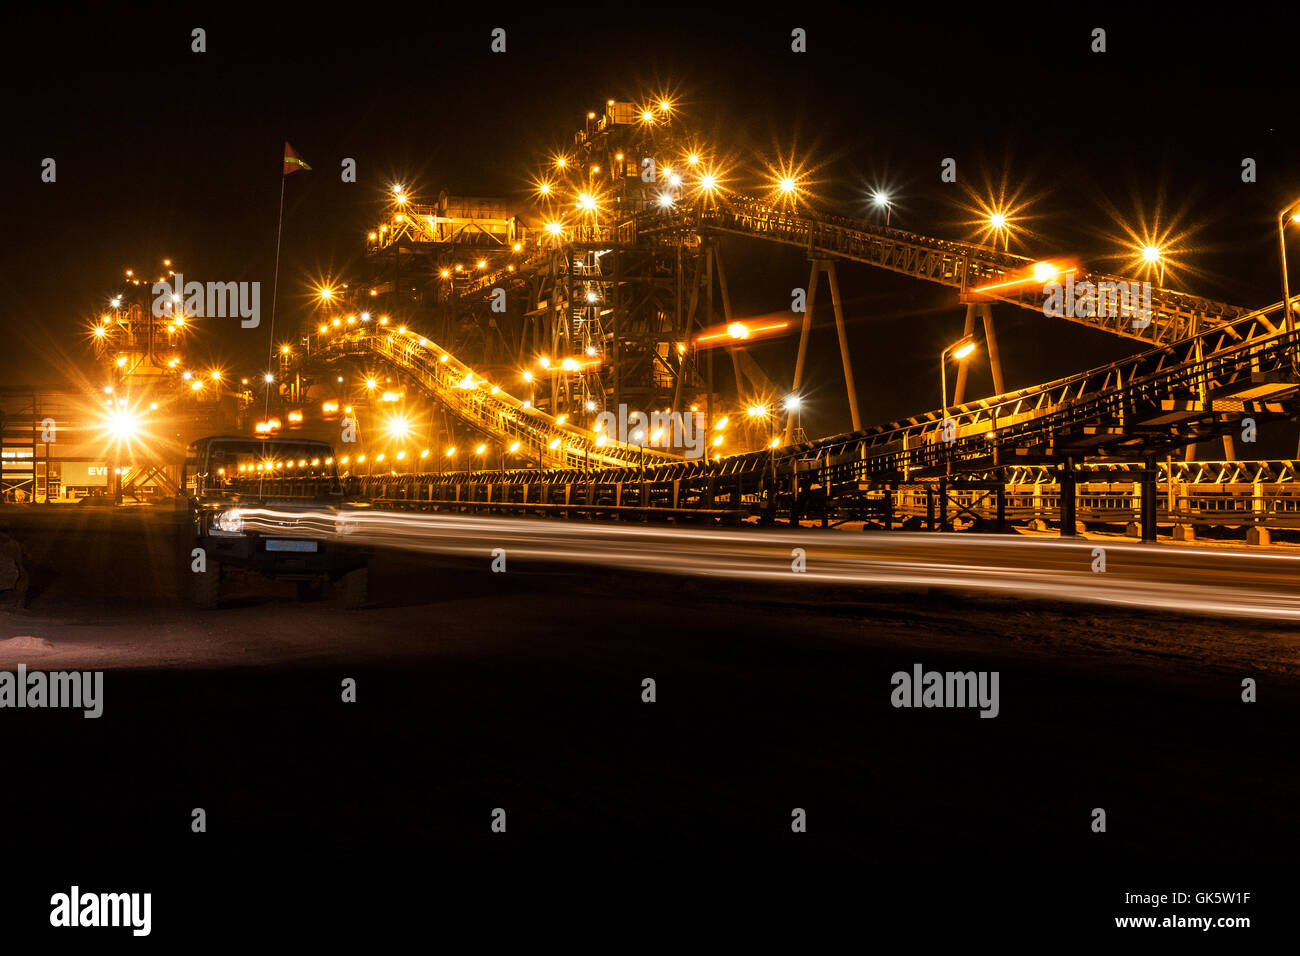 Mining operations for transporting and managing iron ore. Night view of new processing plant lit up and illuminated by truck headlights. West Africa. Stock Photo